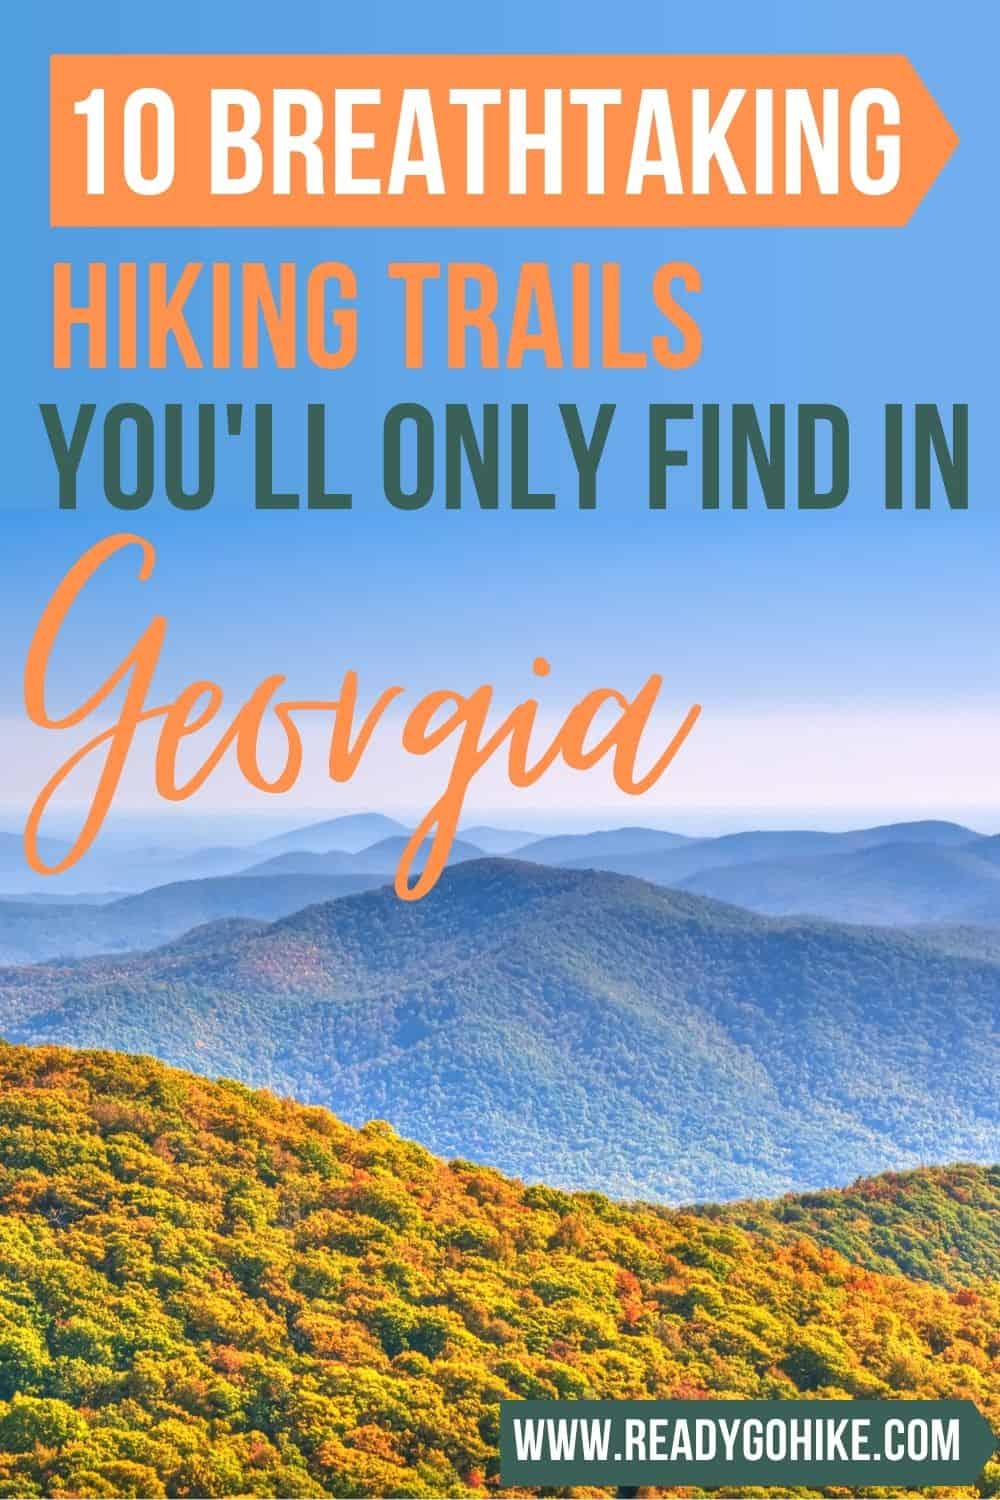 Mountains in North Georgia with text overlay 10 Breathtaking Hiking Trails You'll Only Find in Georgia